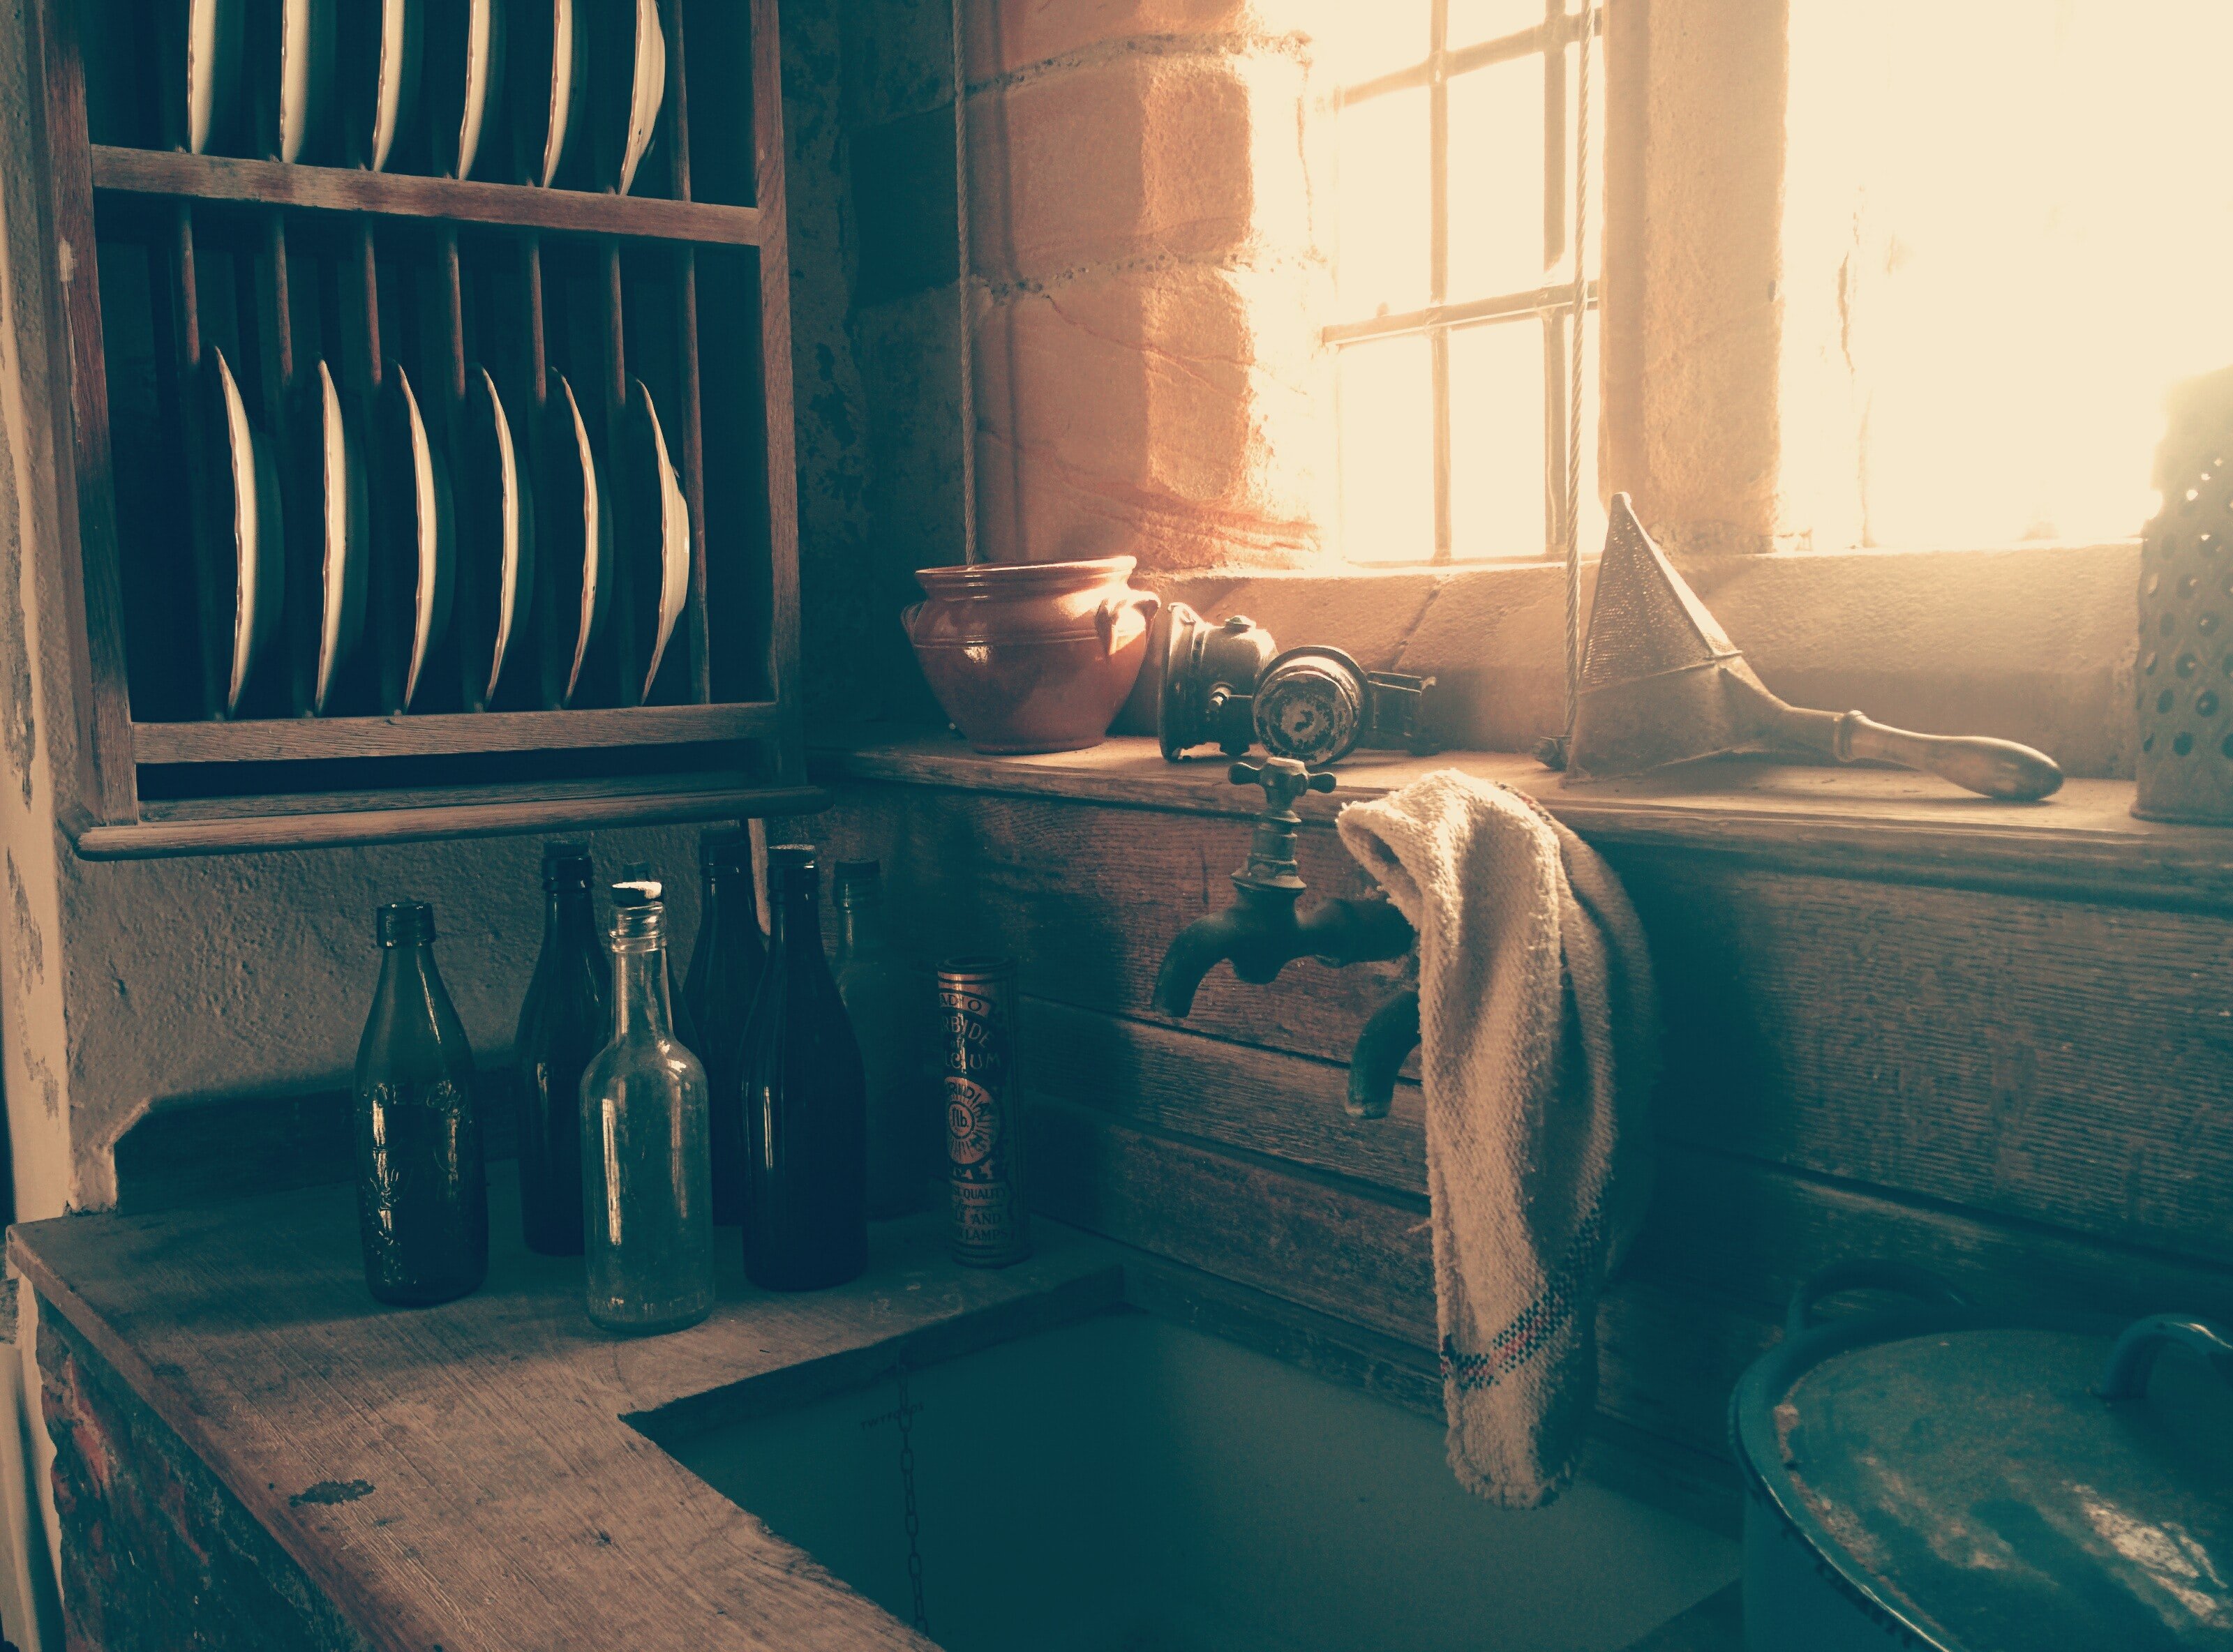 There was a huddled figure on the floor of the old kitchen. | Source: Unsplash